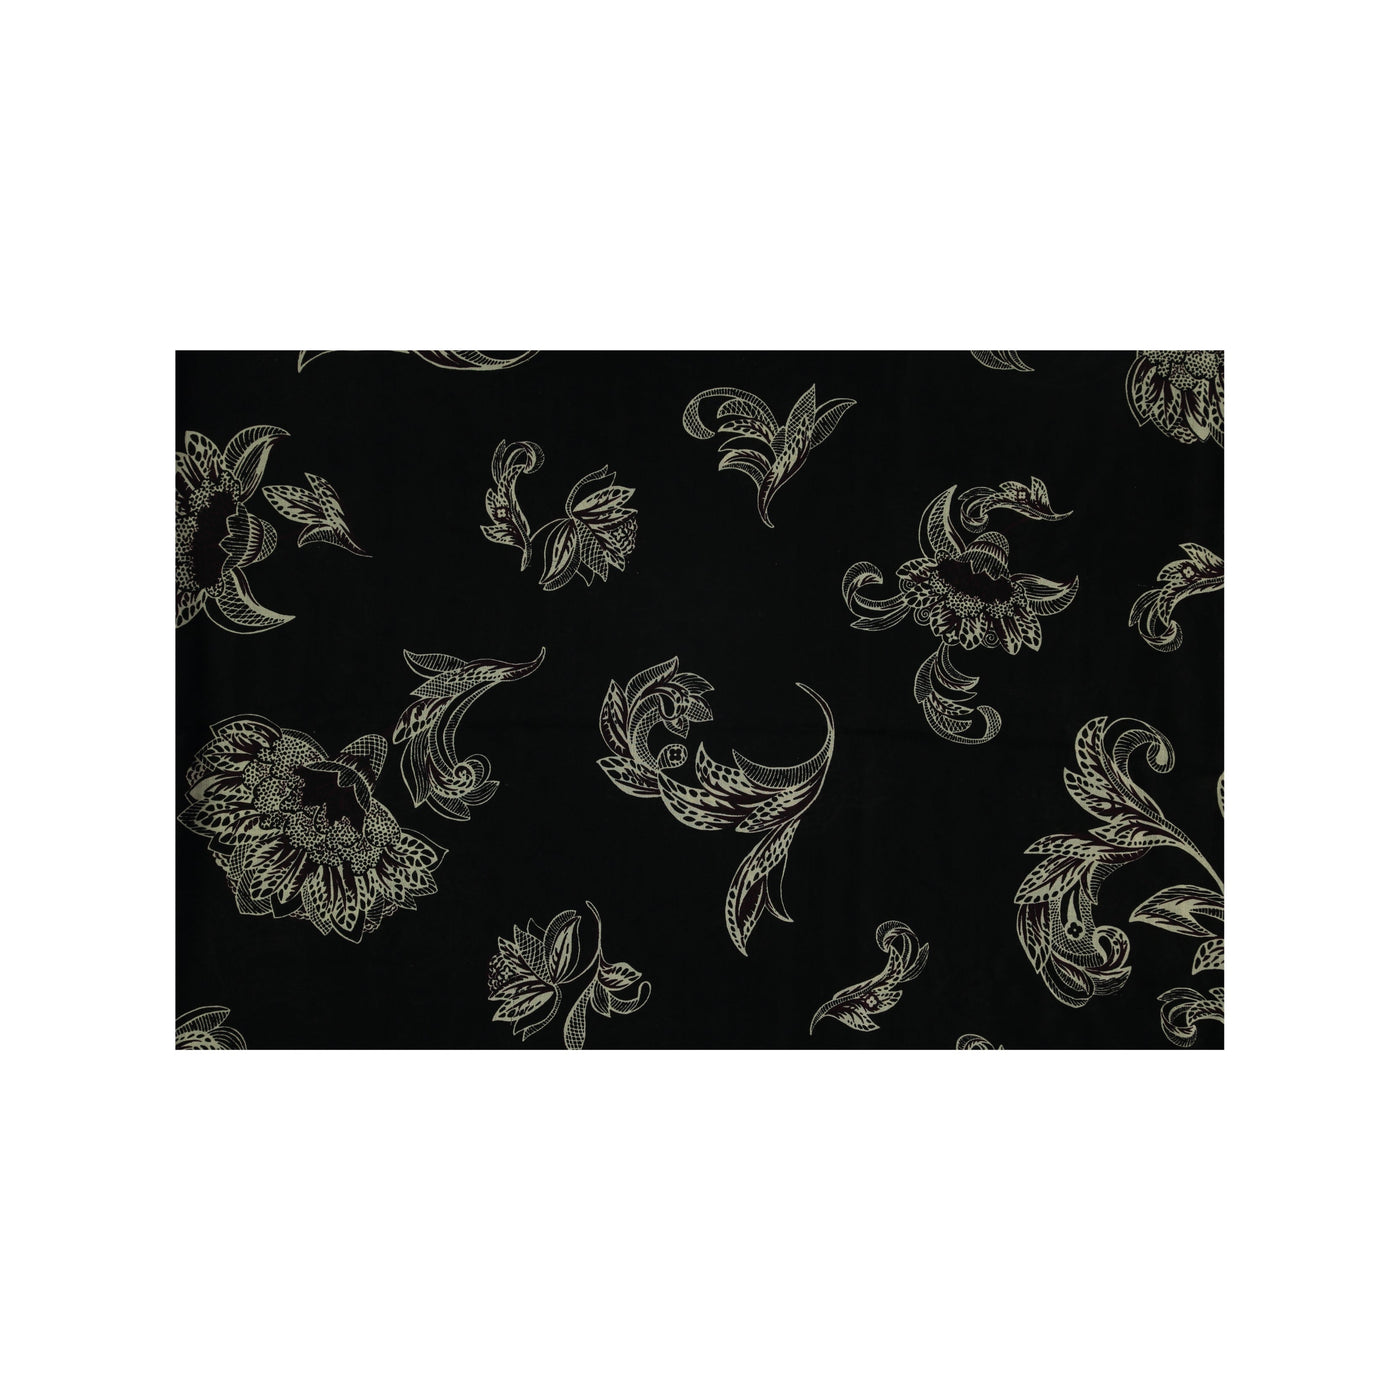 Louis Vuitton Black and White Floral Pattern Scarf - '10s